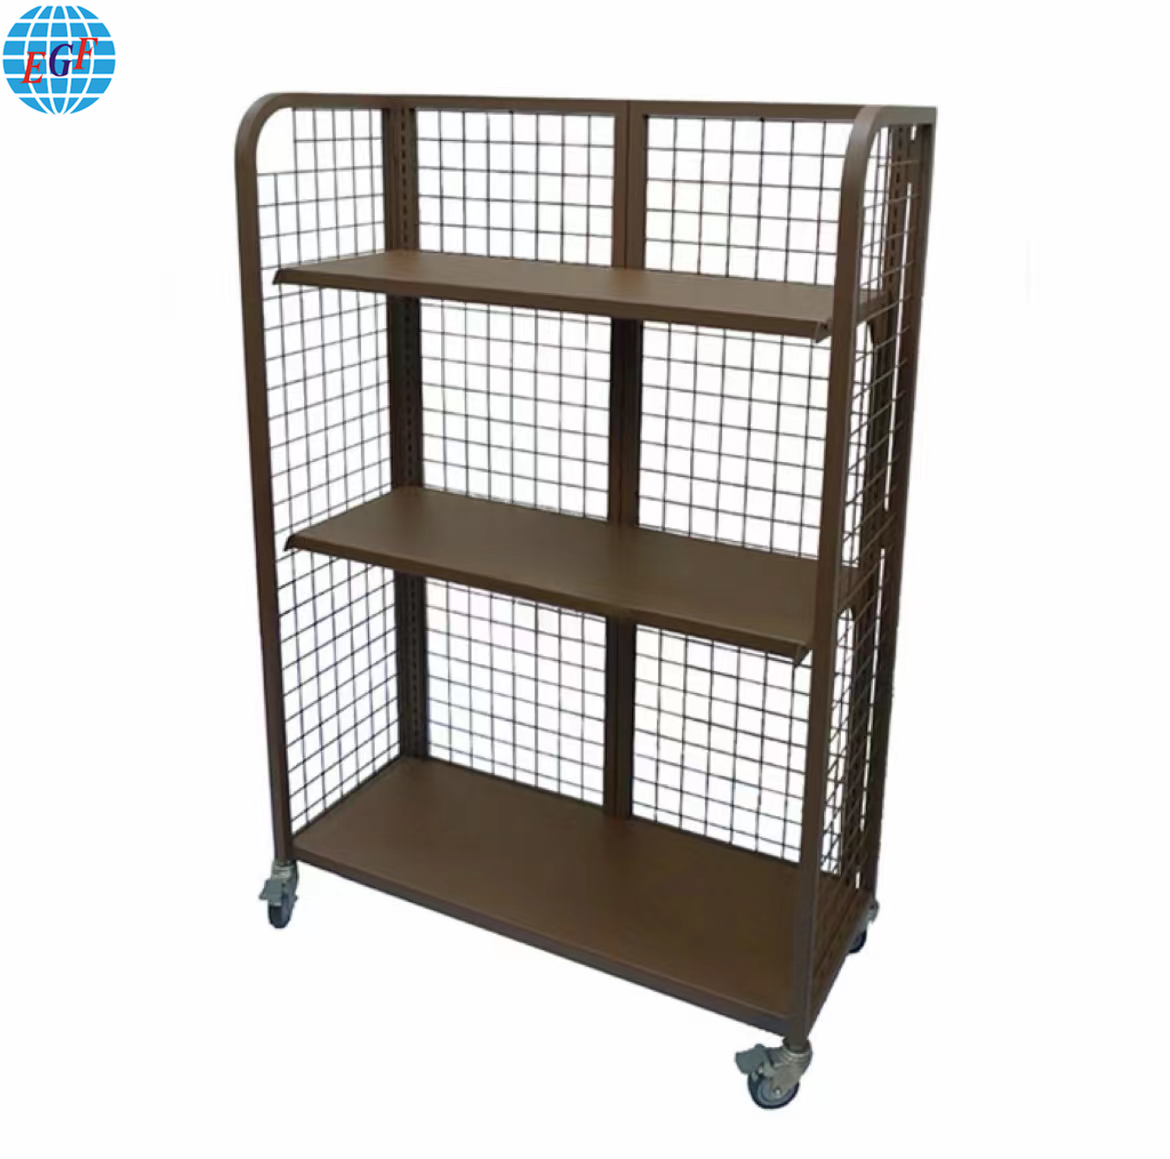 Space-Saving Foldable Gridwall Display Rack with Adjustable Shelves and Castors Storage Solution Powder Coating Portable Design